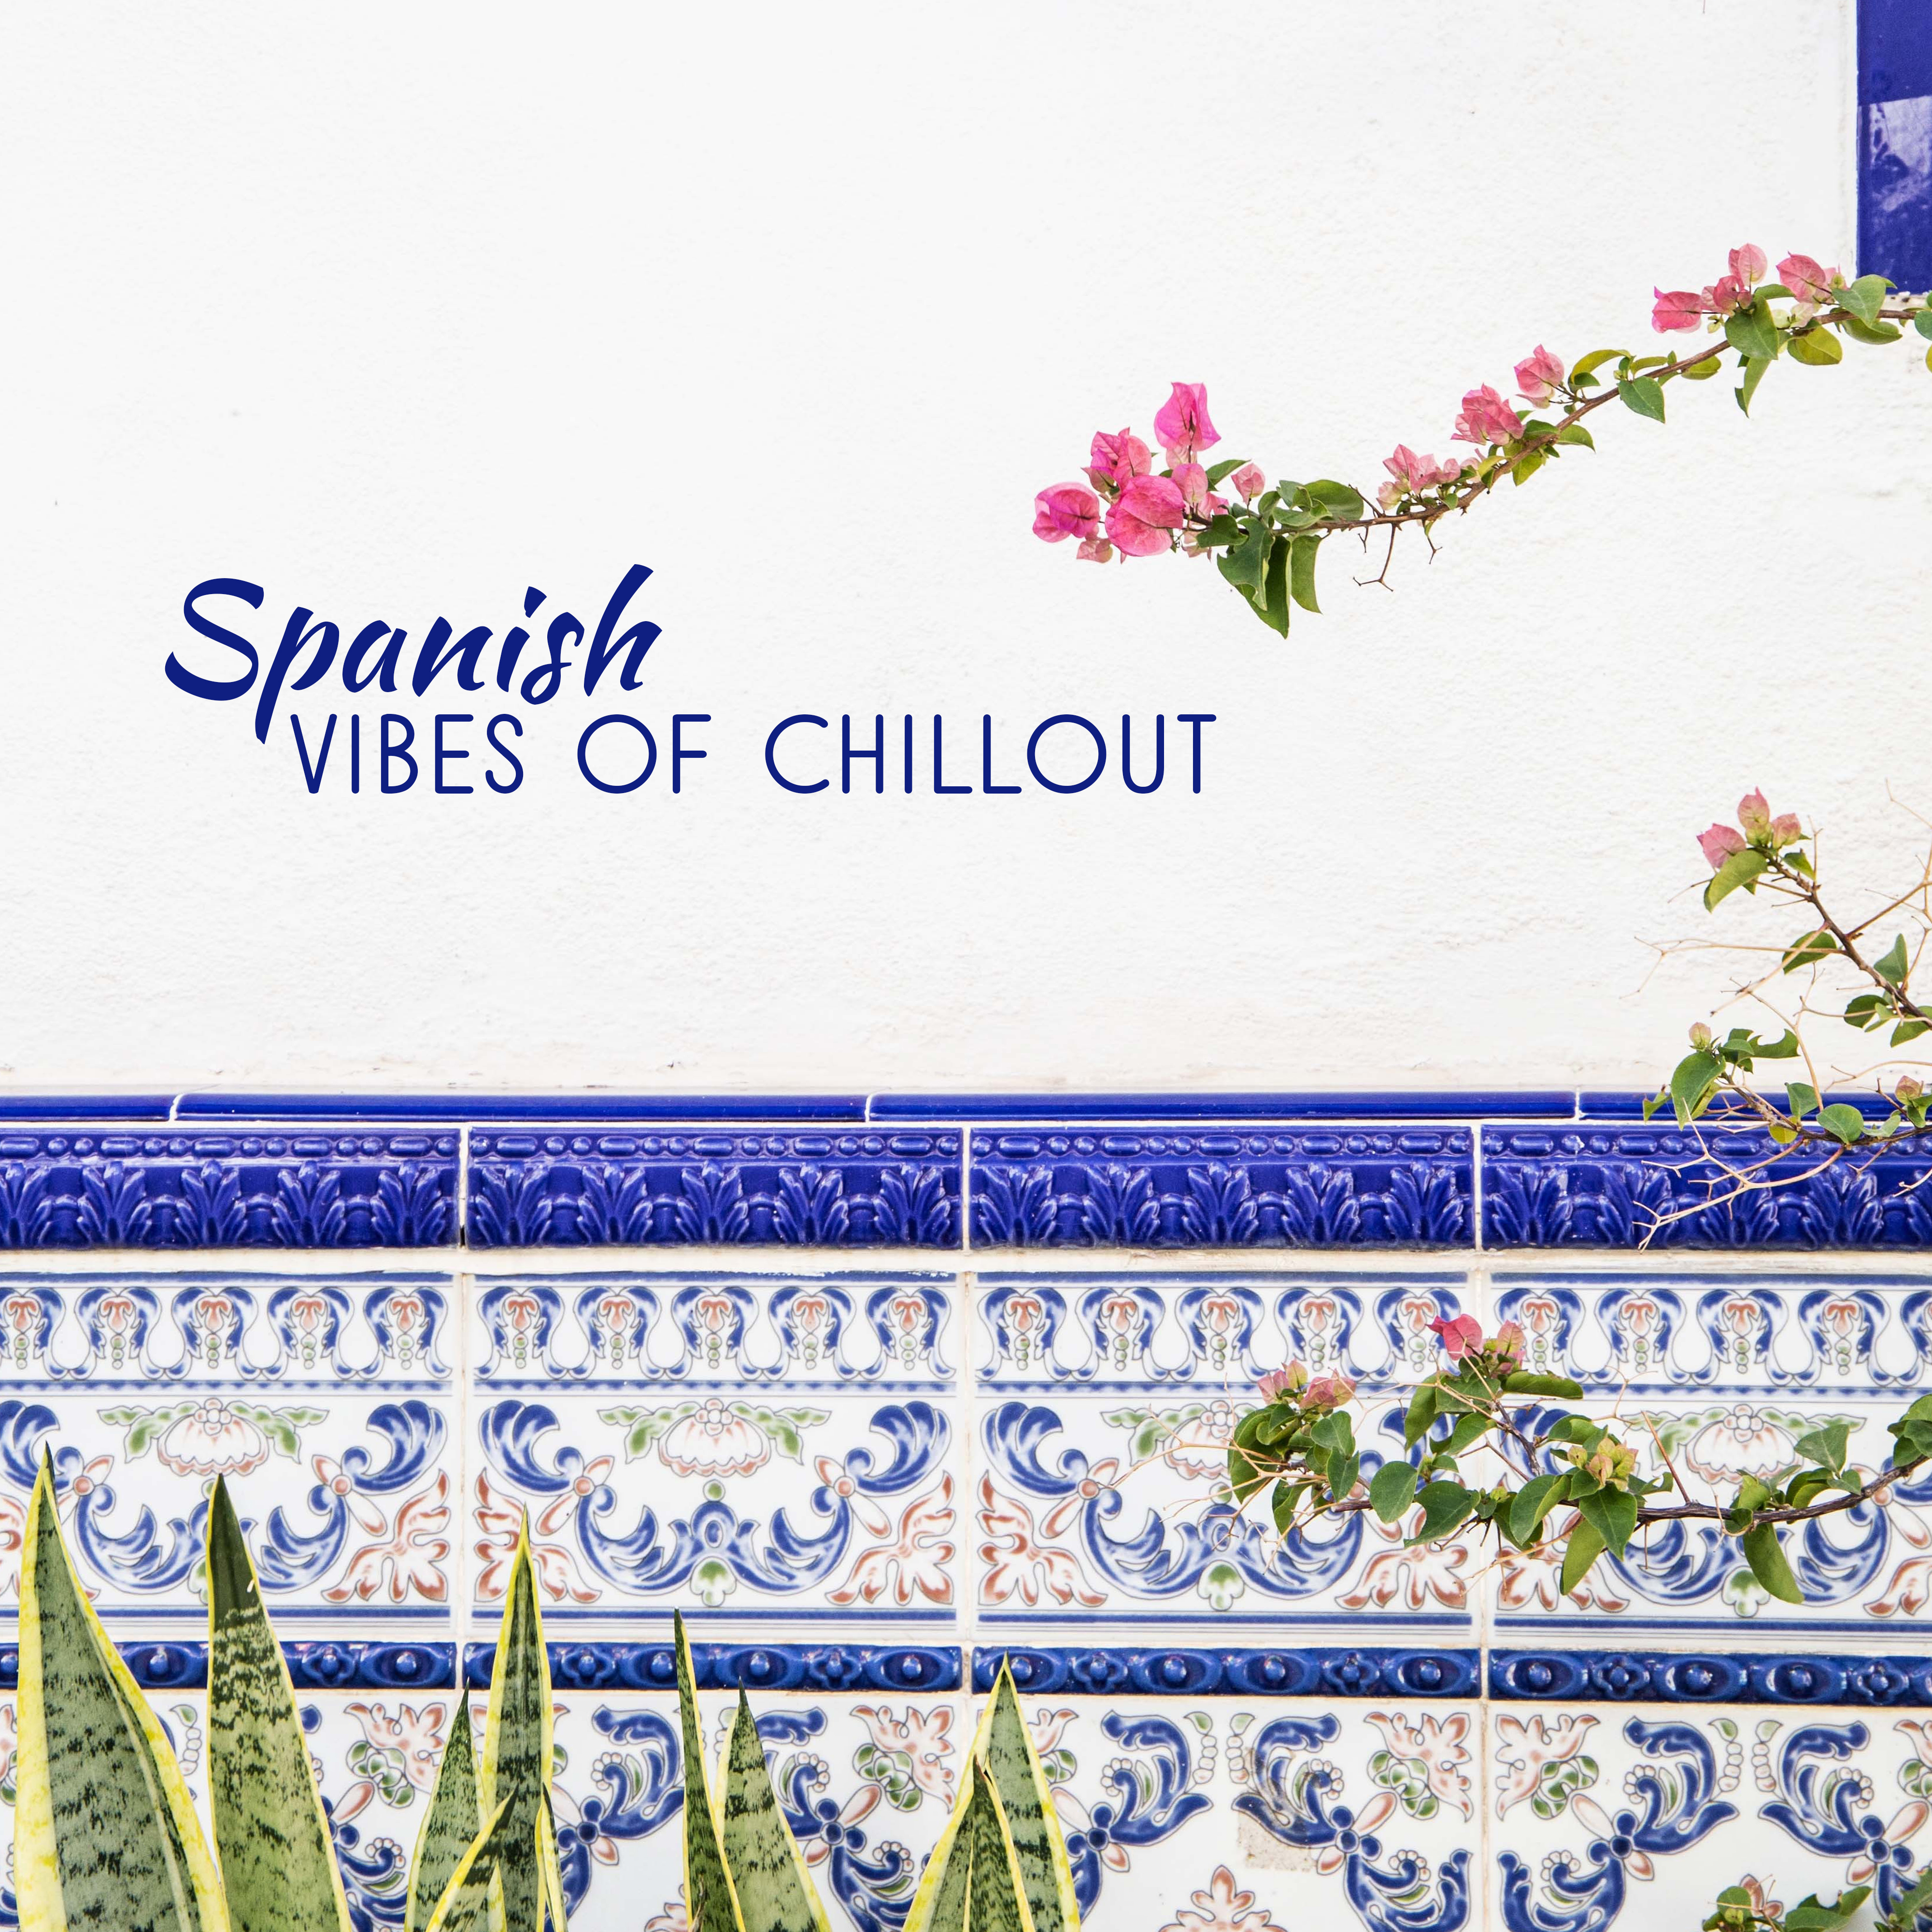 Spanish Vibes of Chillout